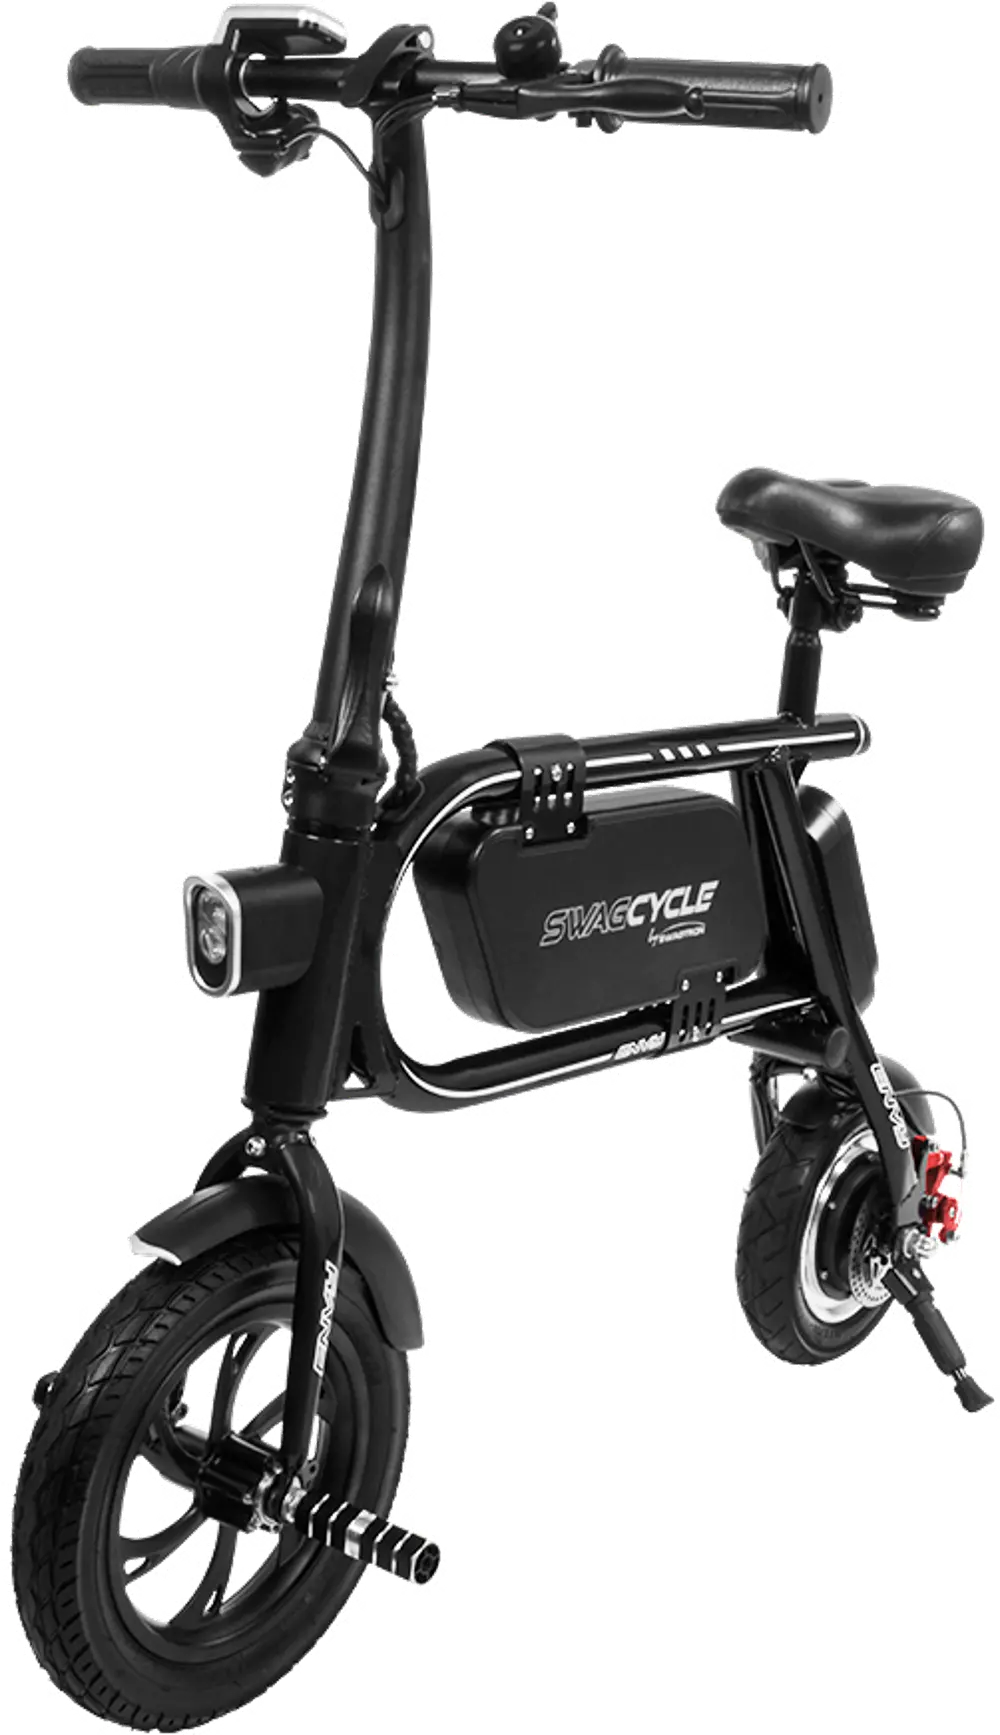 SWAGCYCLE Envy Steel Frame Folding Electric Bicycle - Black-1